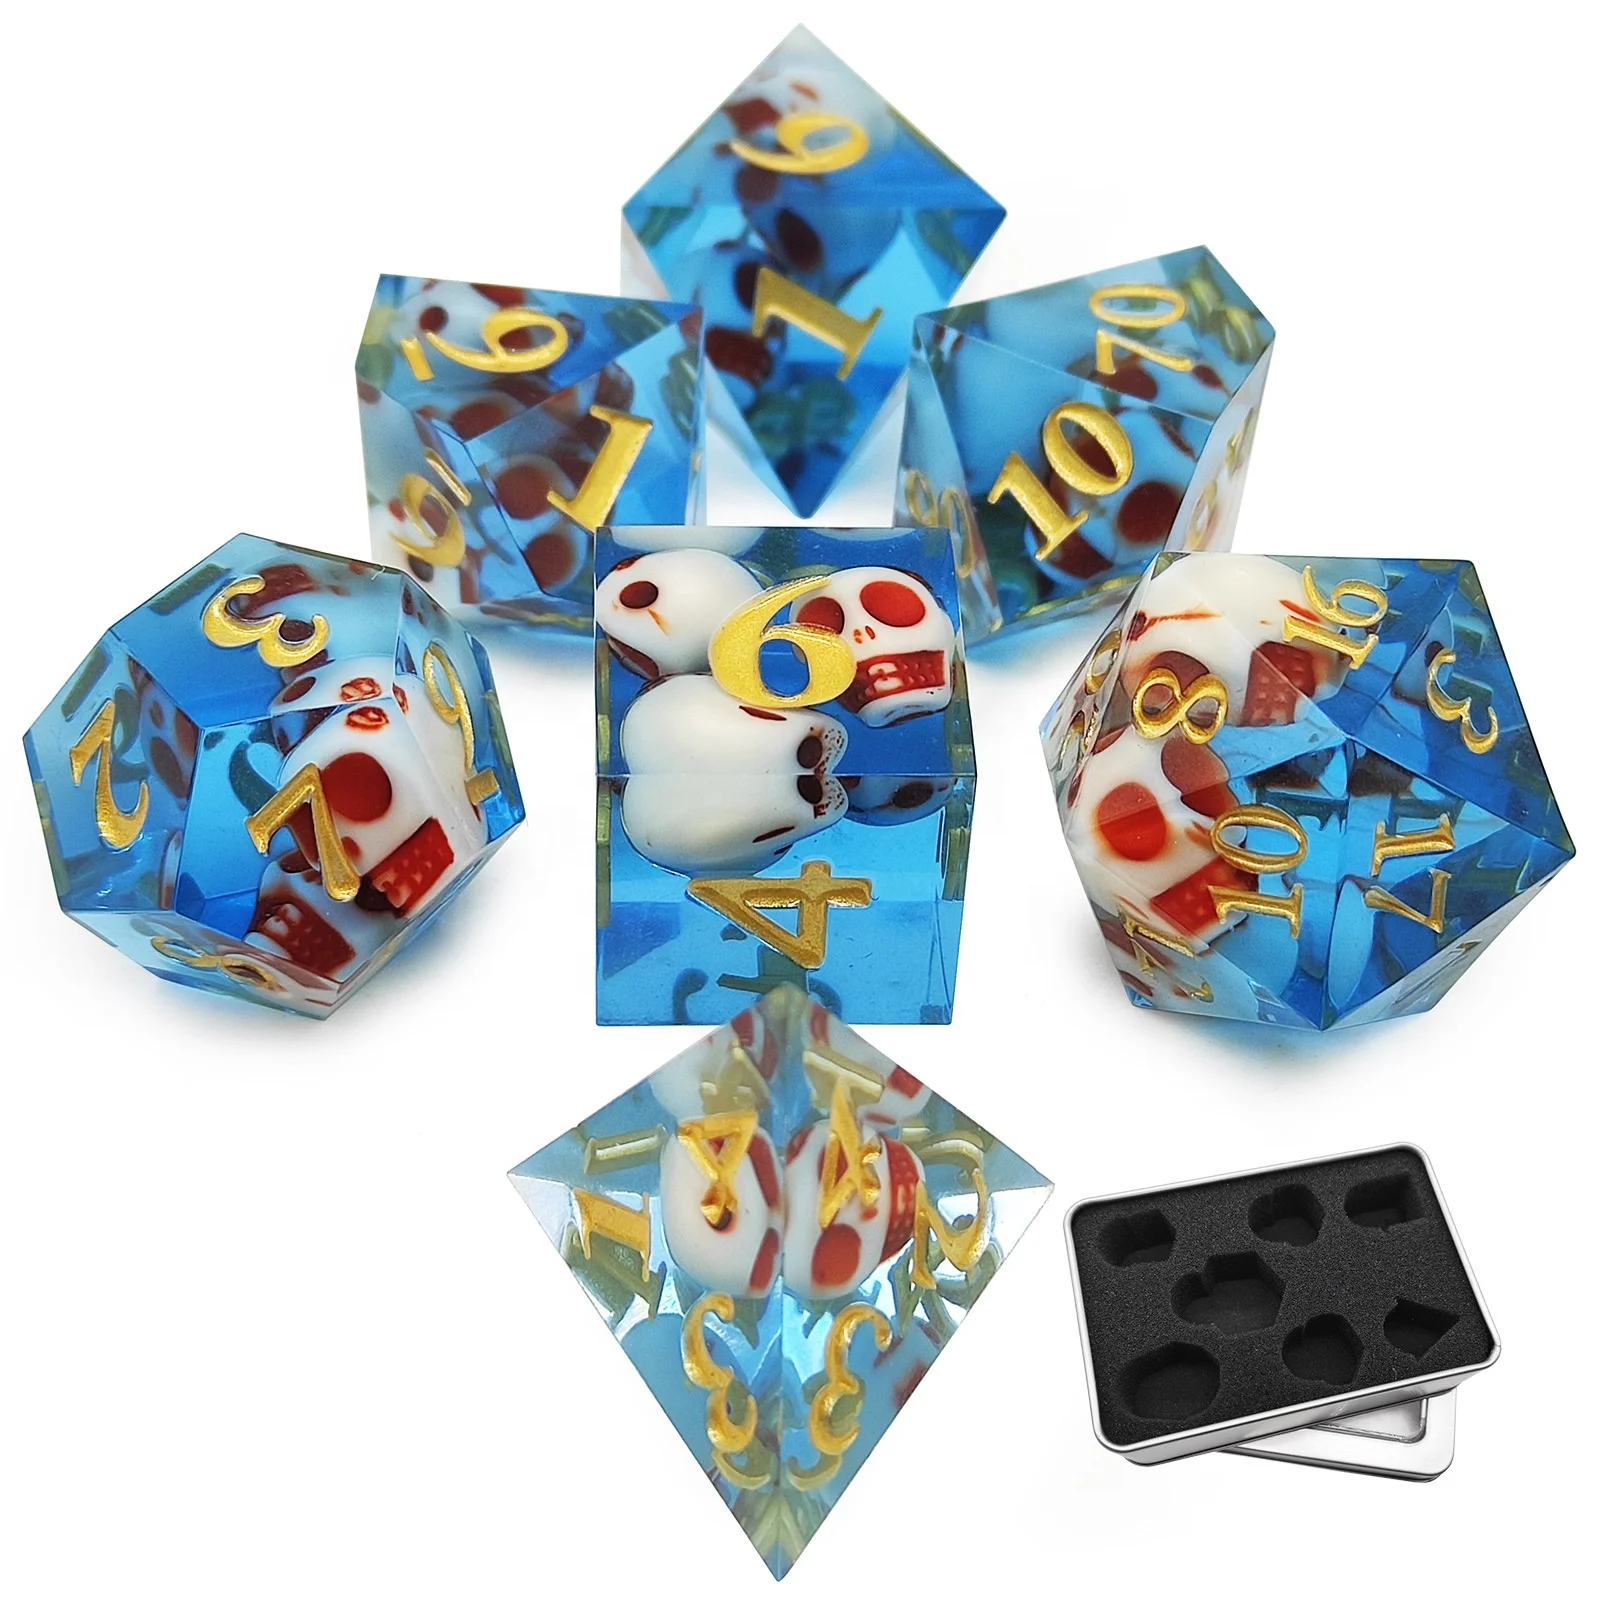 

DND Dice Set Accessories Skull MTG Dungeons and Dragons D&D RPG D20 Polyhedral Math Board Game Pathfinder Sharp Edge Resin Dice